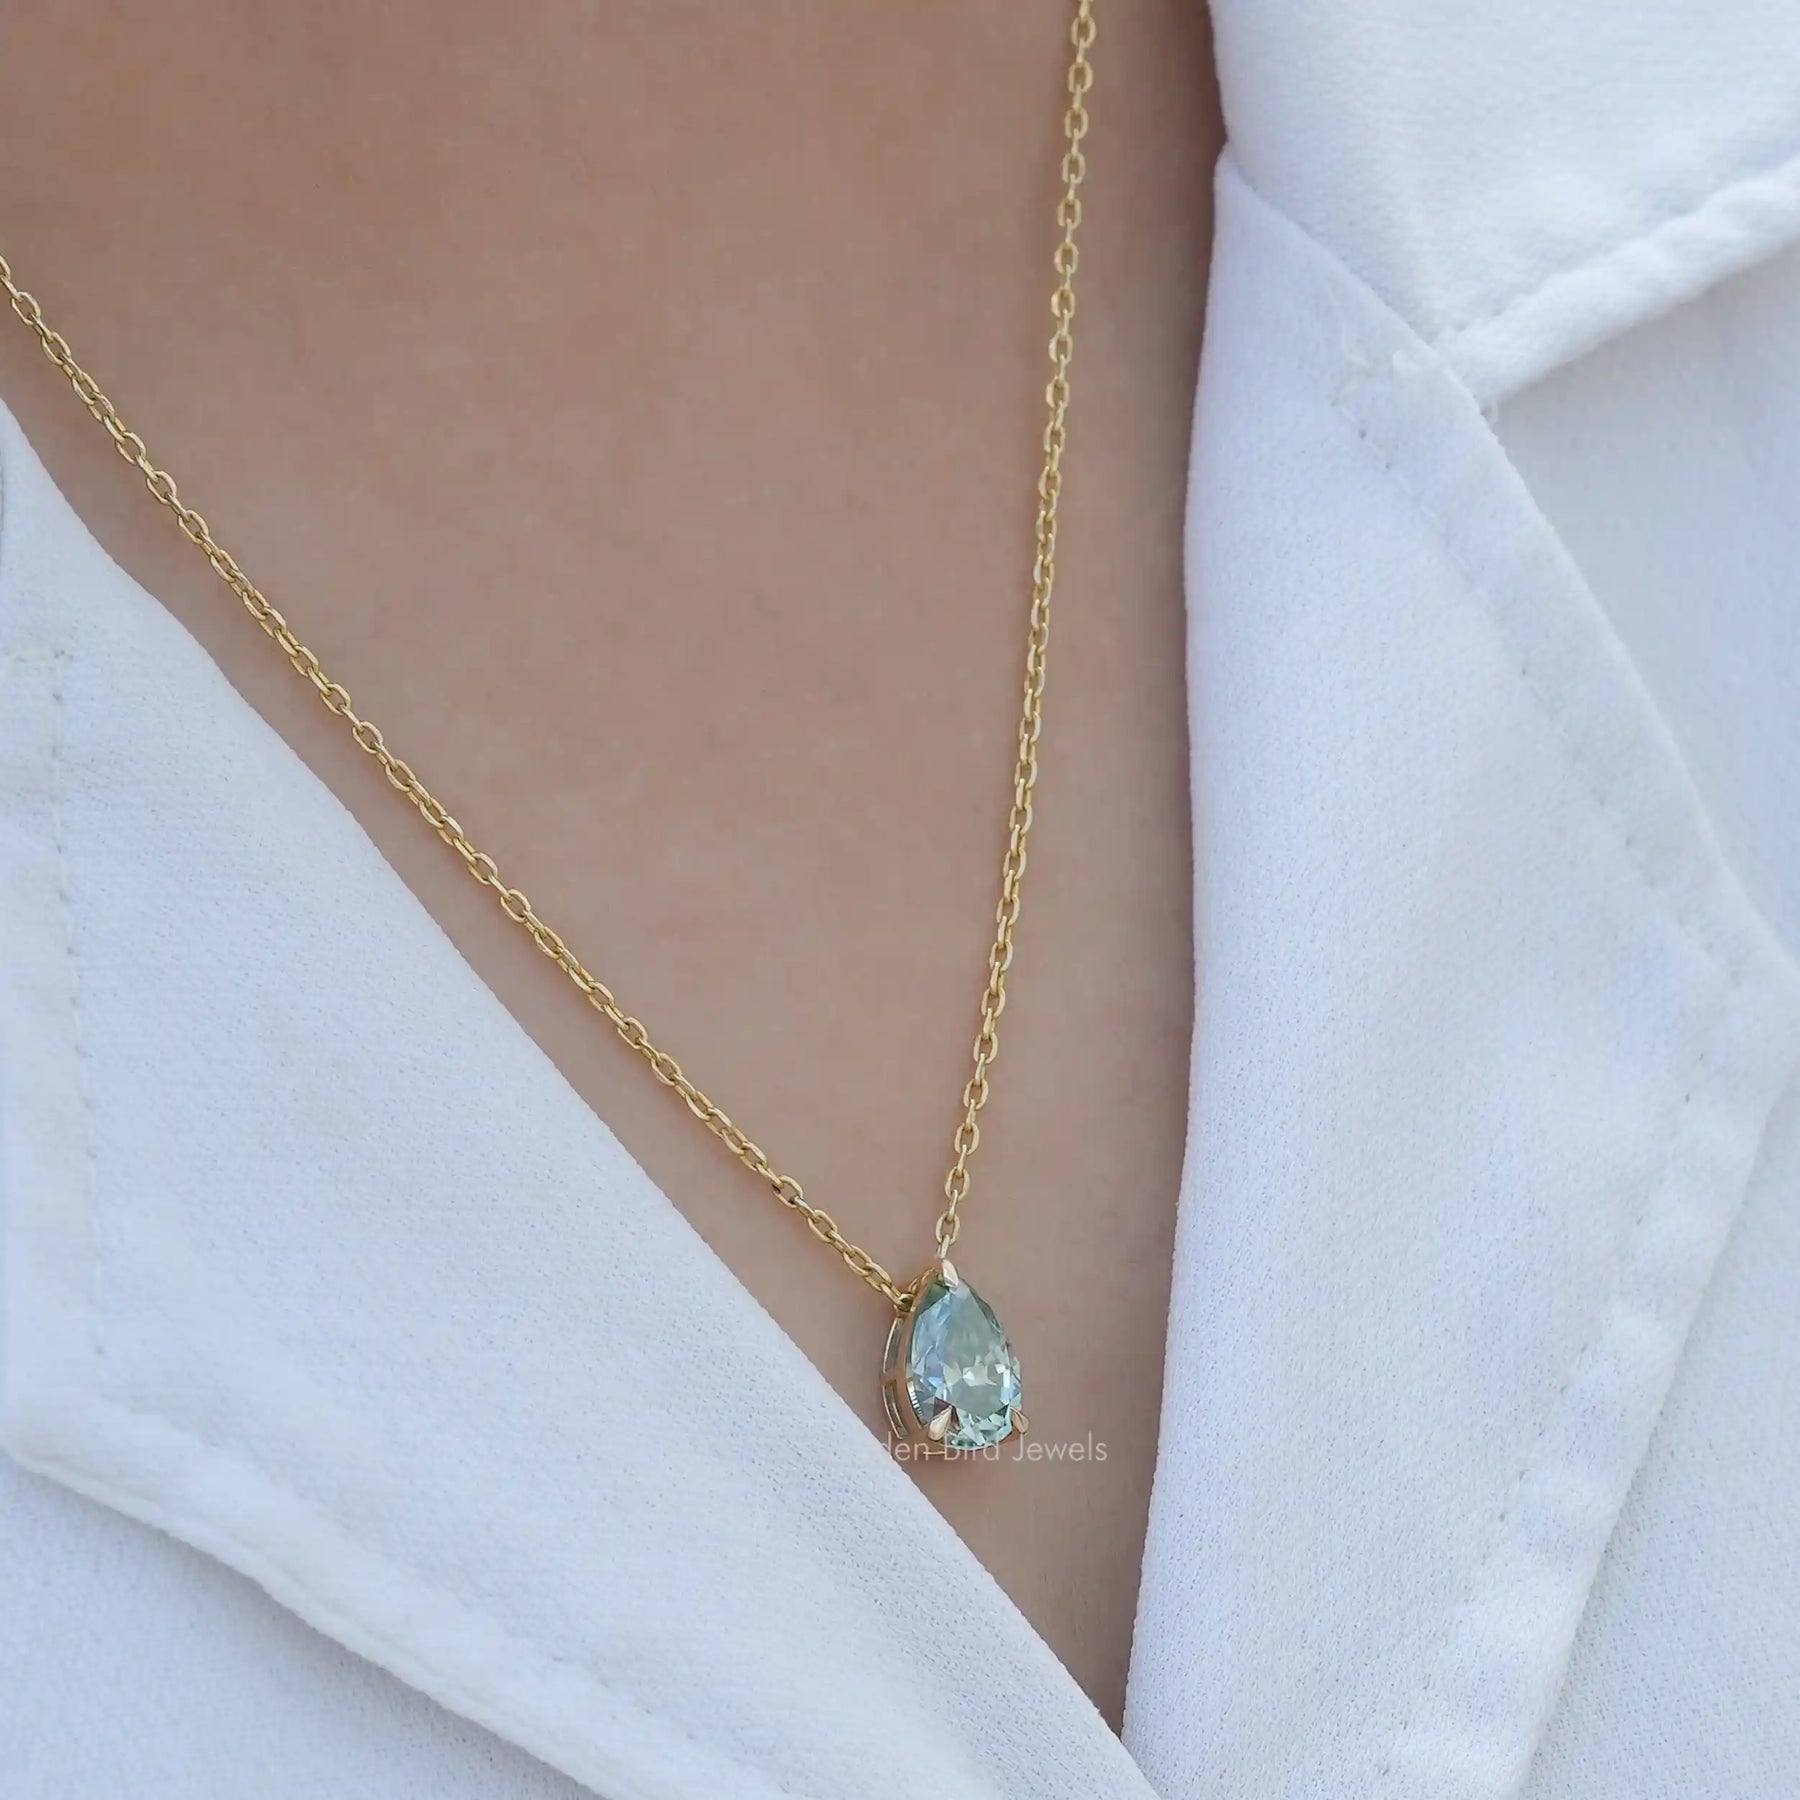 [In neck front view of moissanite solitaire pendant in 14k yellow gold]-[Golden Bird Jewels]